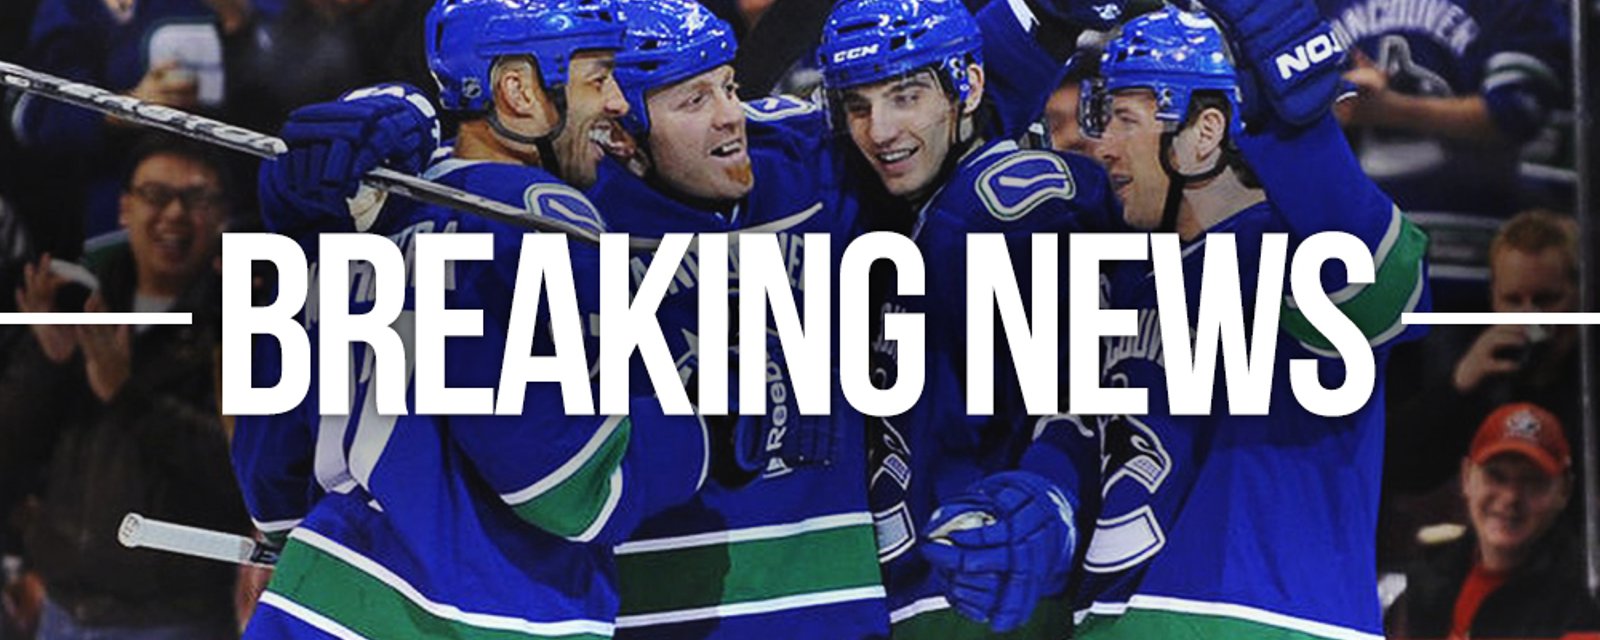 Breaking: Canucks hire former player as an assistant coach